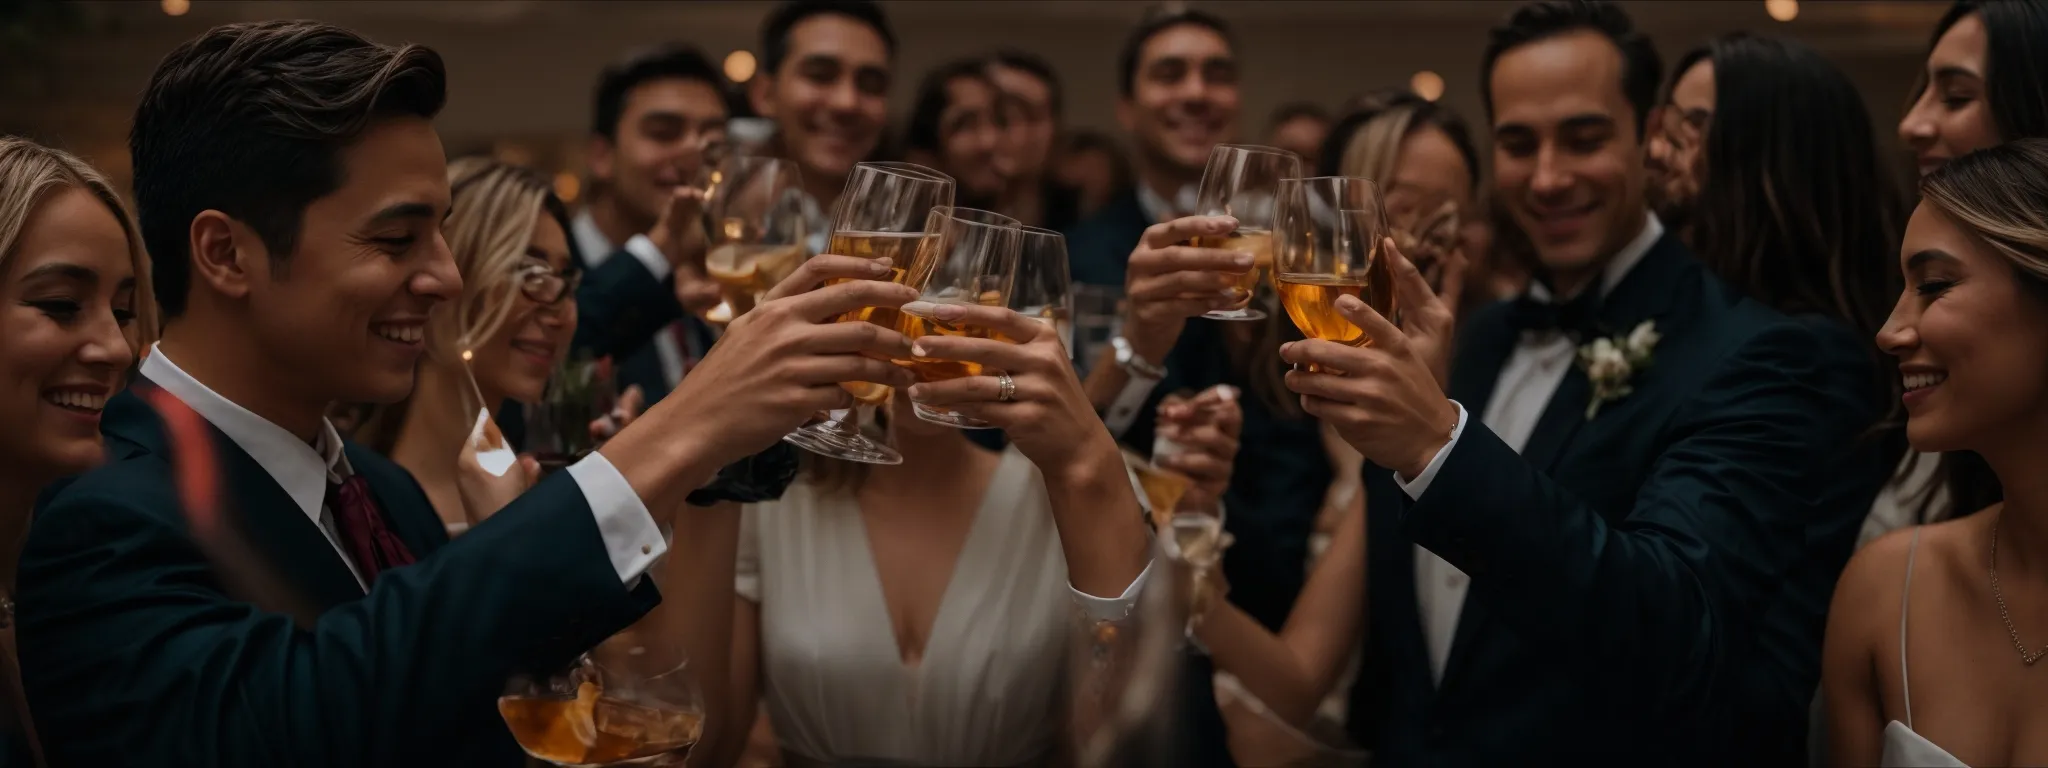 a group of professionals clinking glasses in a toast during a celebratory team event.